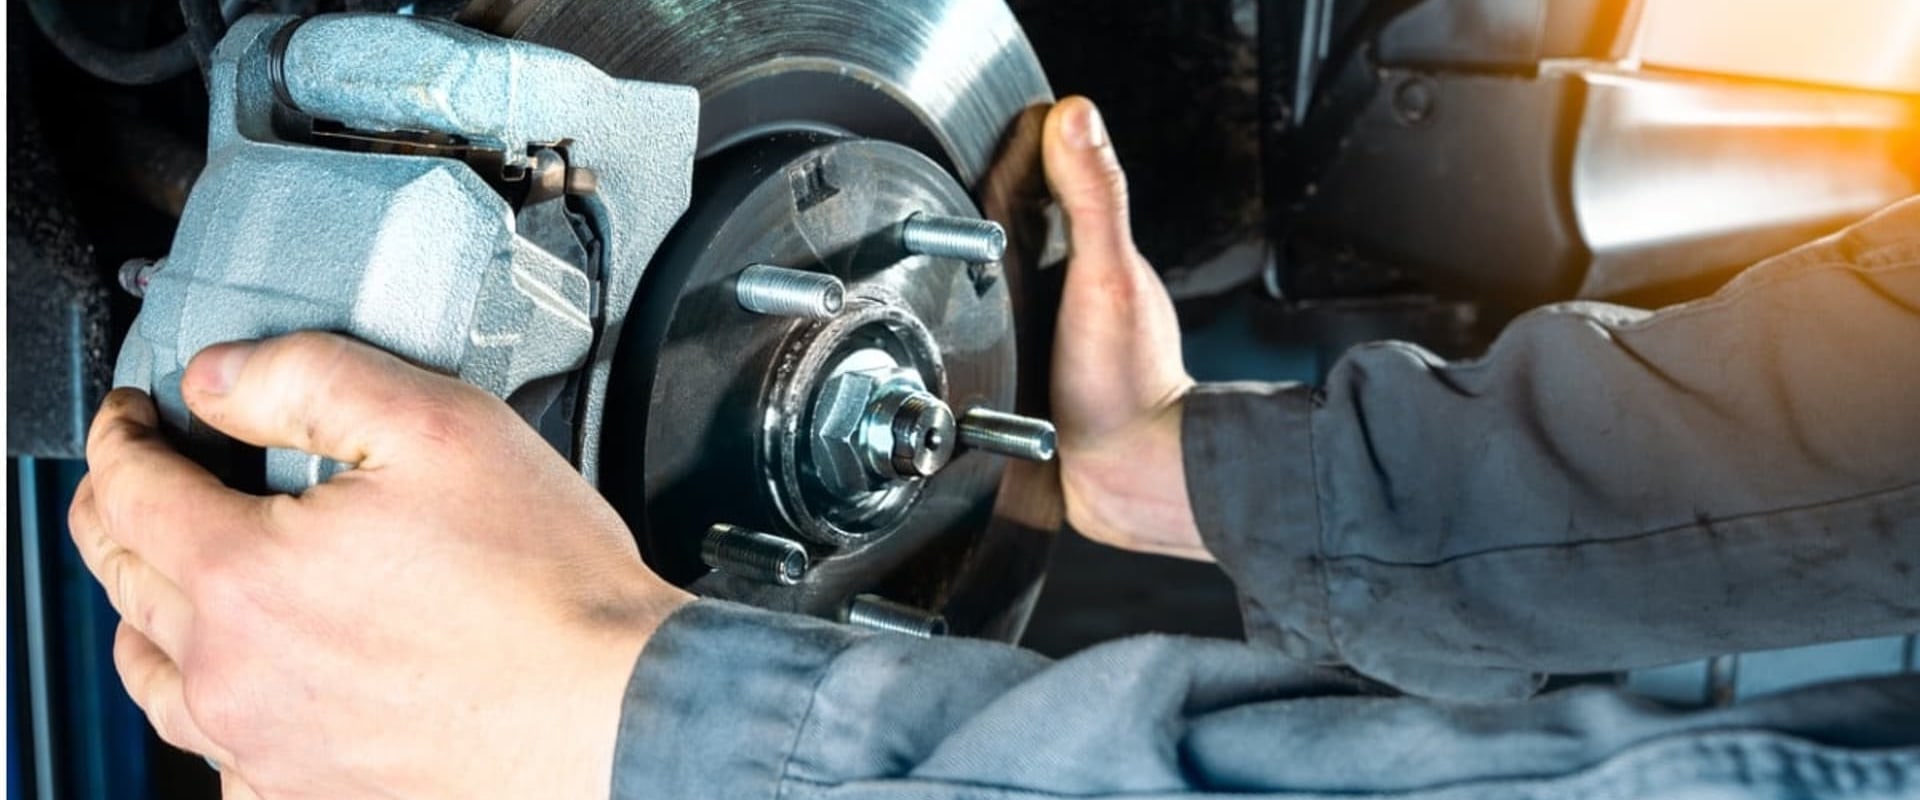 Car Maintenance: Understanding Brake Services and Replacements